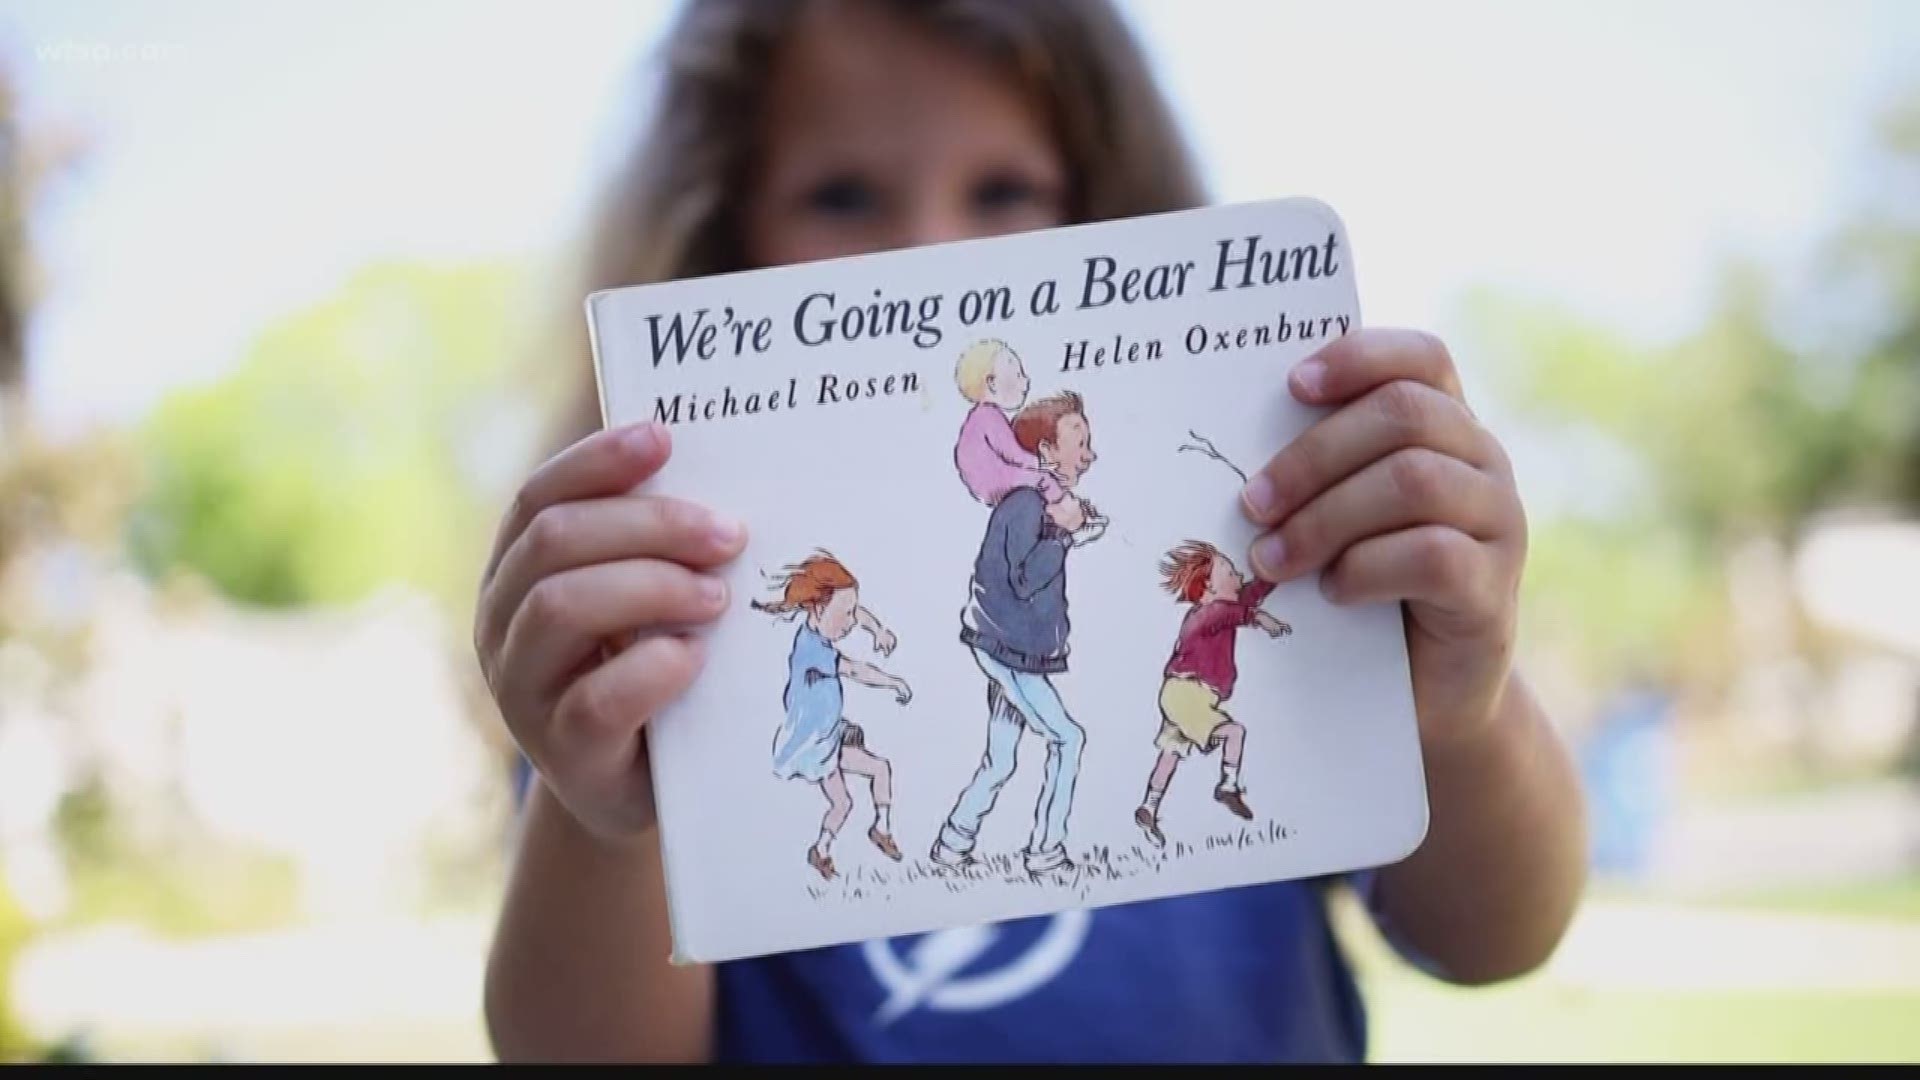 Families can go on "bear hunts" to keep kids active and entertained while practicing good social distancing.